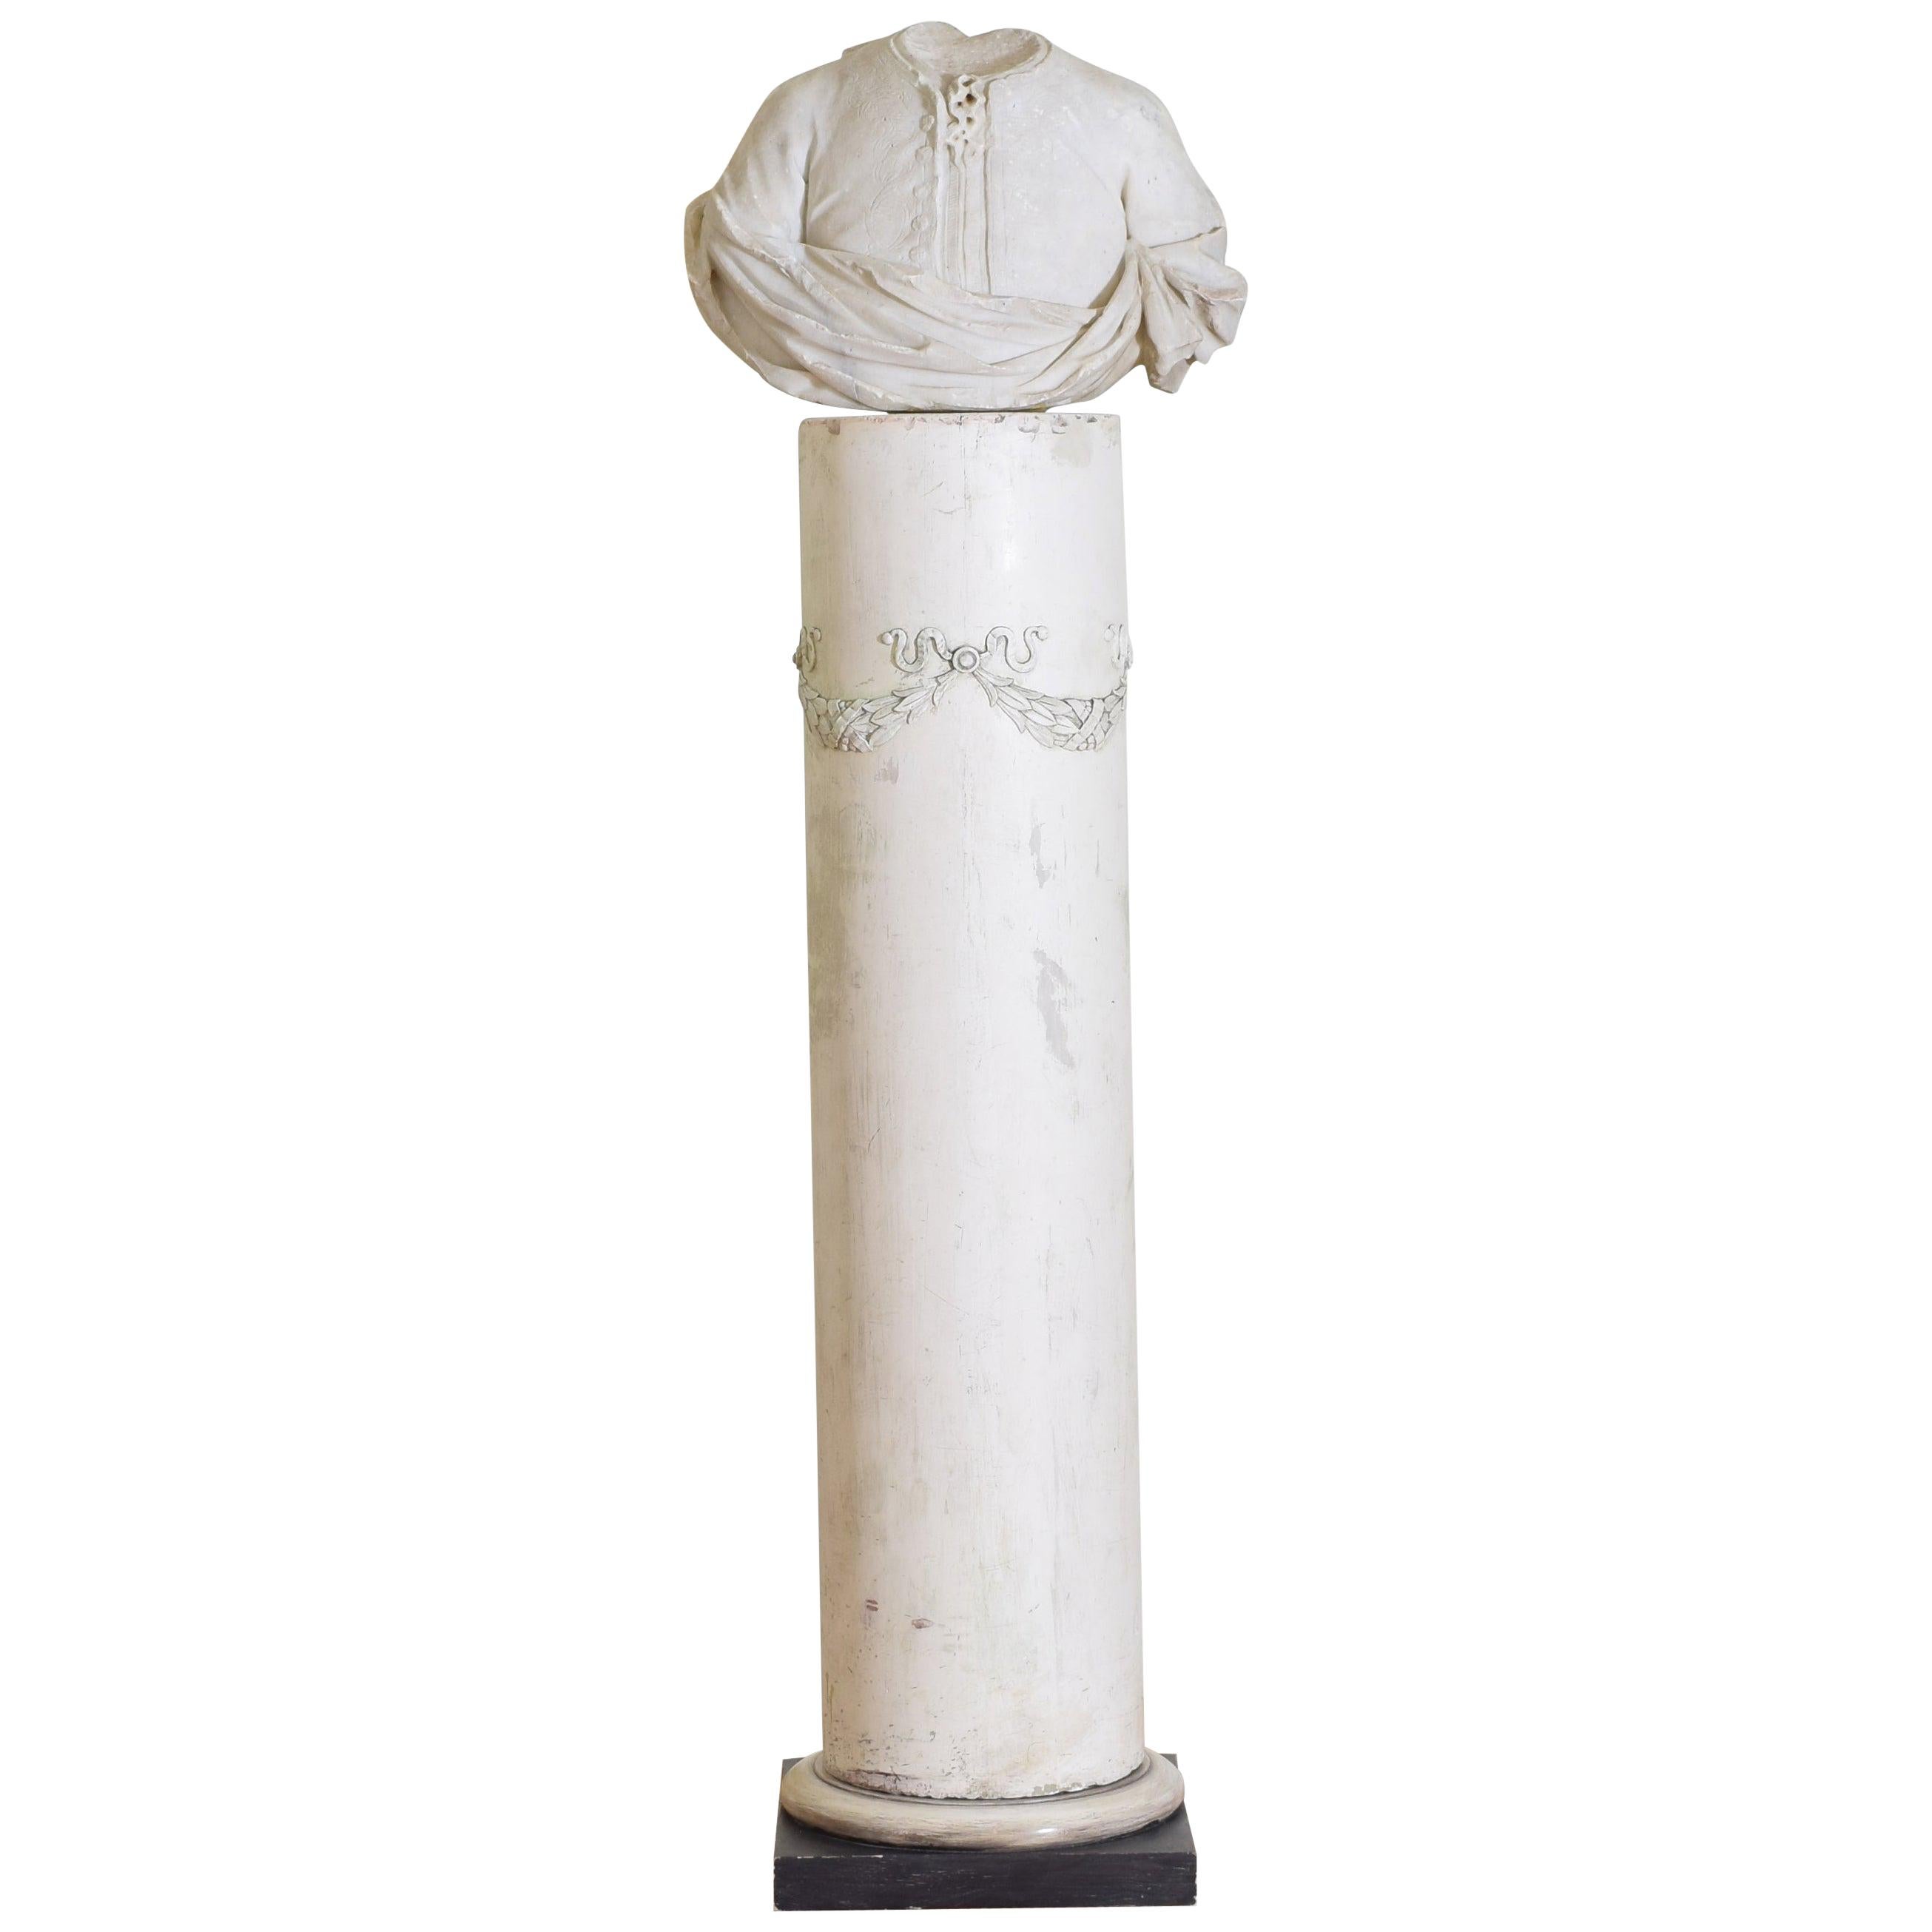 Italian Bust in Statuary Marble on Later Plaster Pedestal, 18th-19th Century For Sale